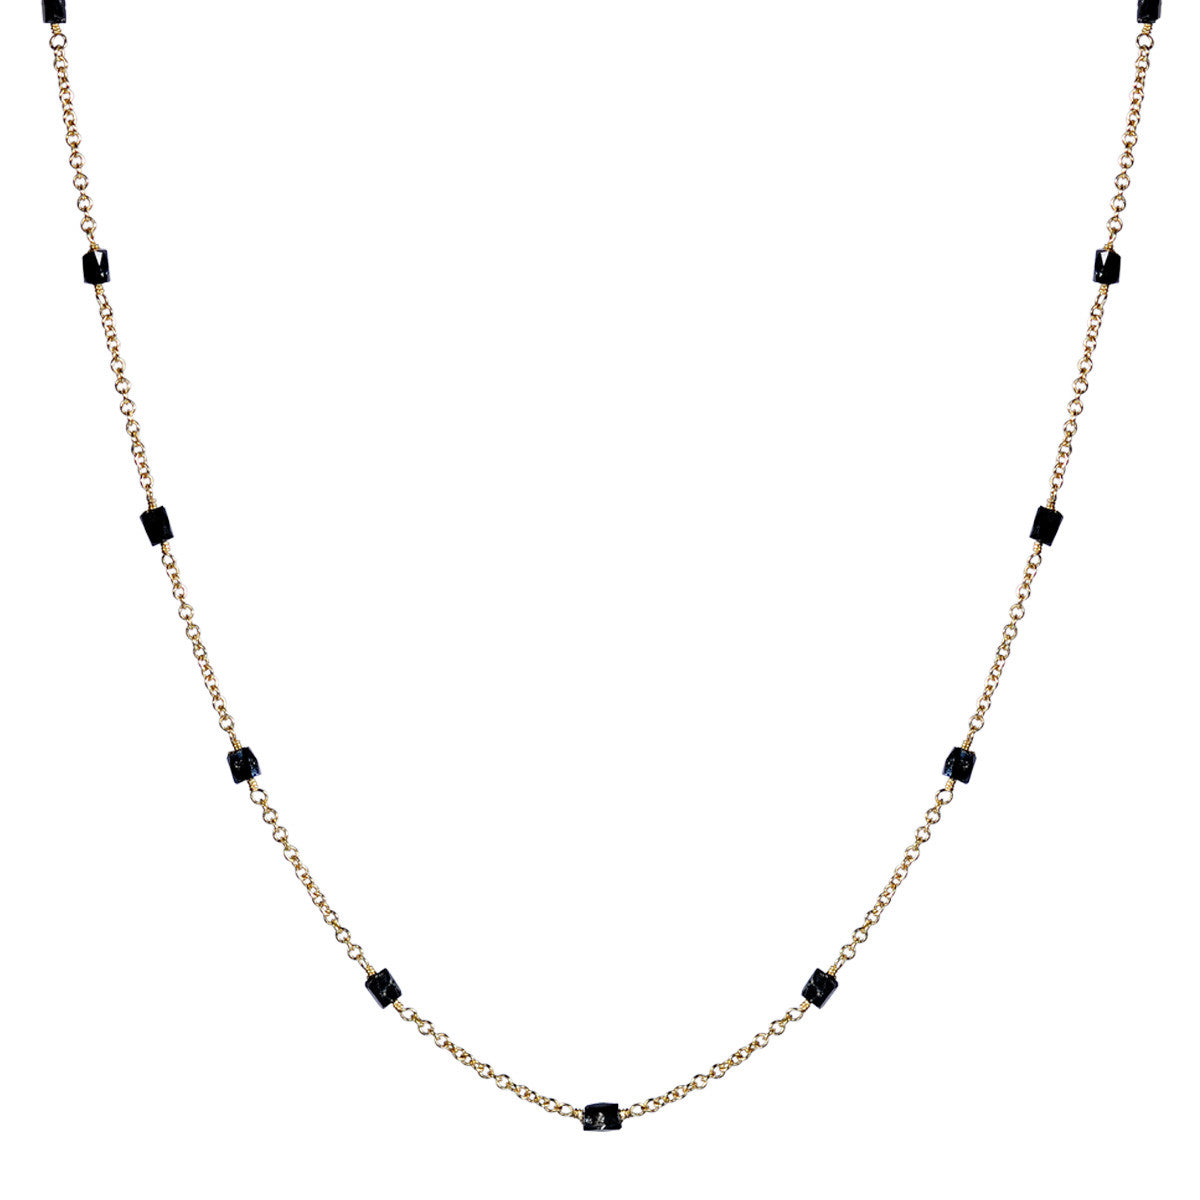 Italian Gold Graduated Beaded Chain Necklace in 18K Gold – 16.5